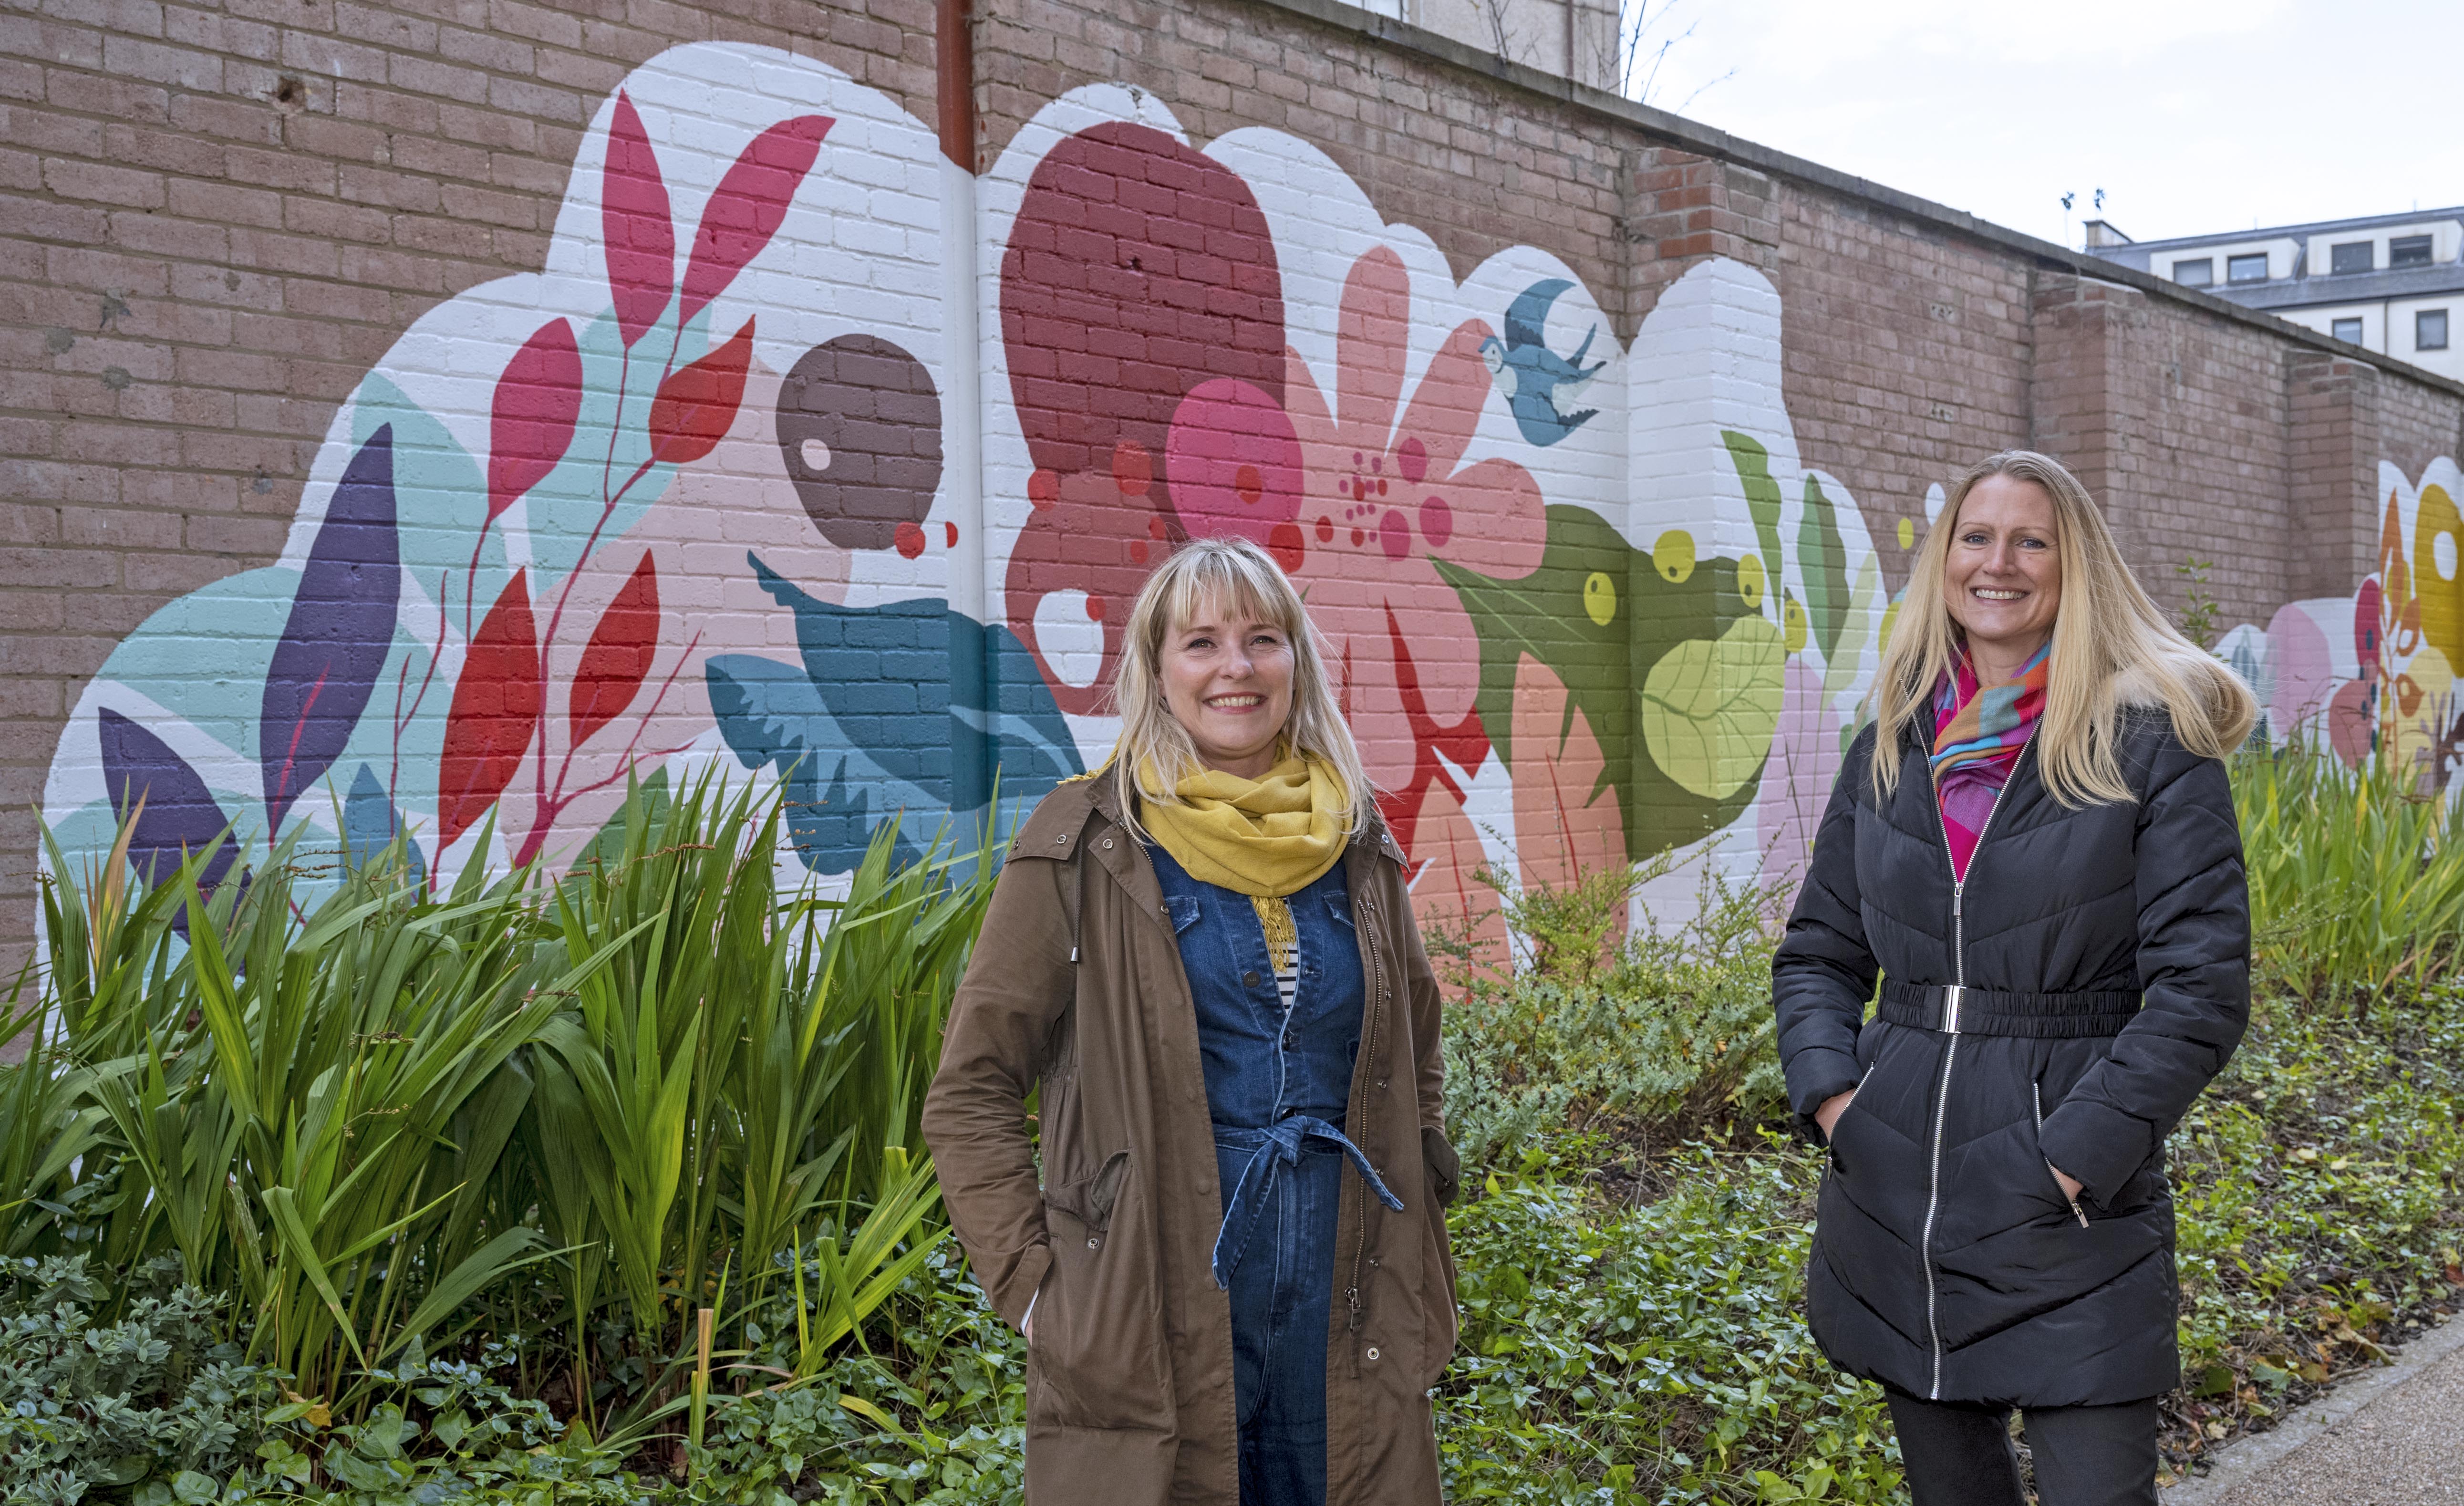 PoLHA and local charity commission mural for Leith development